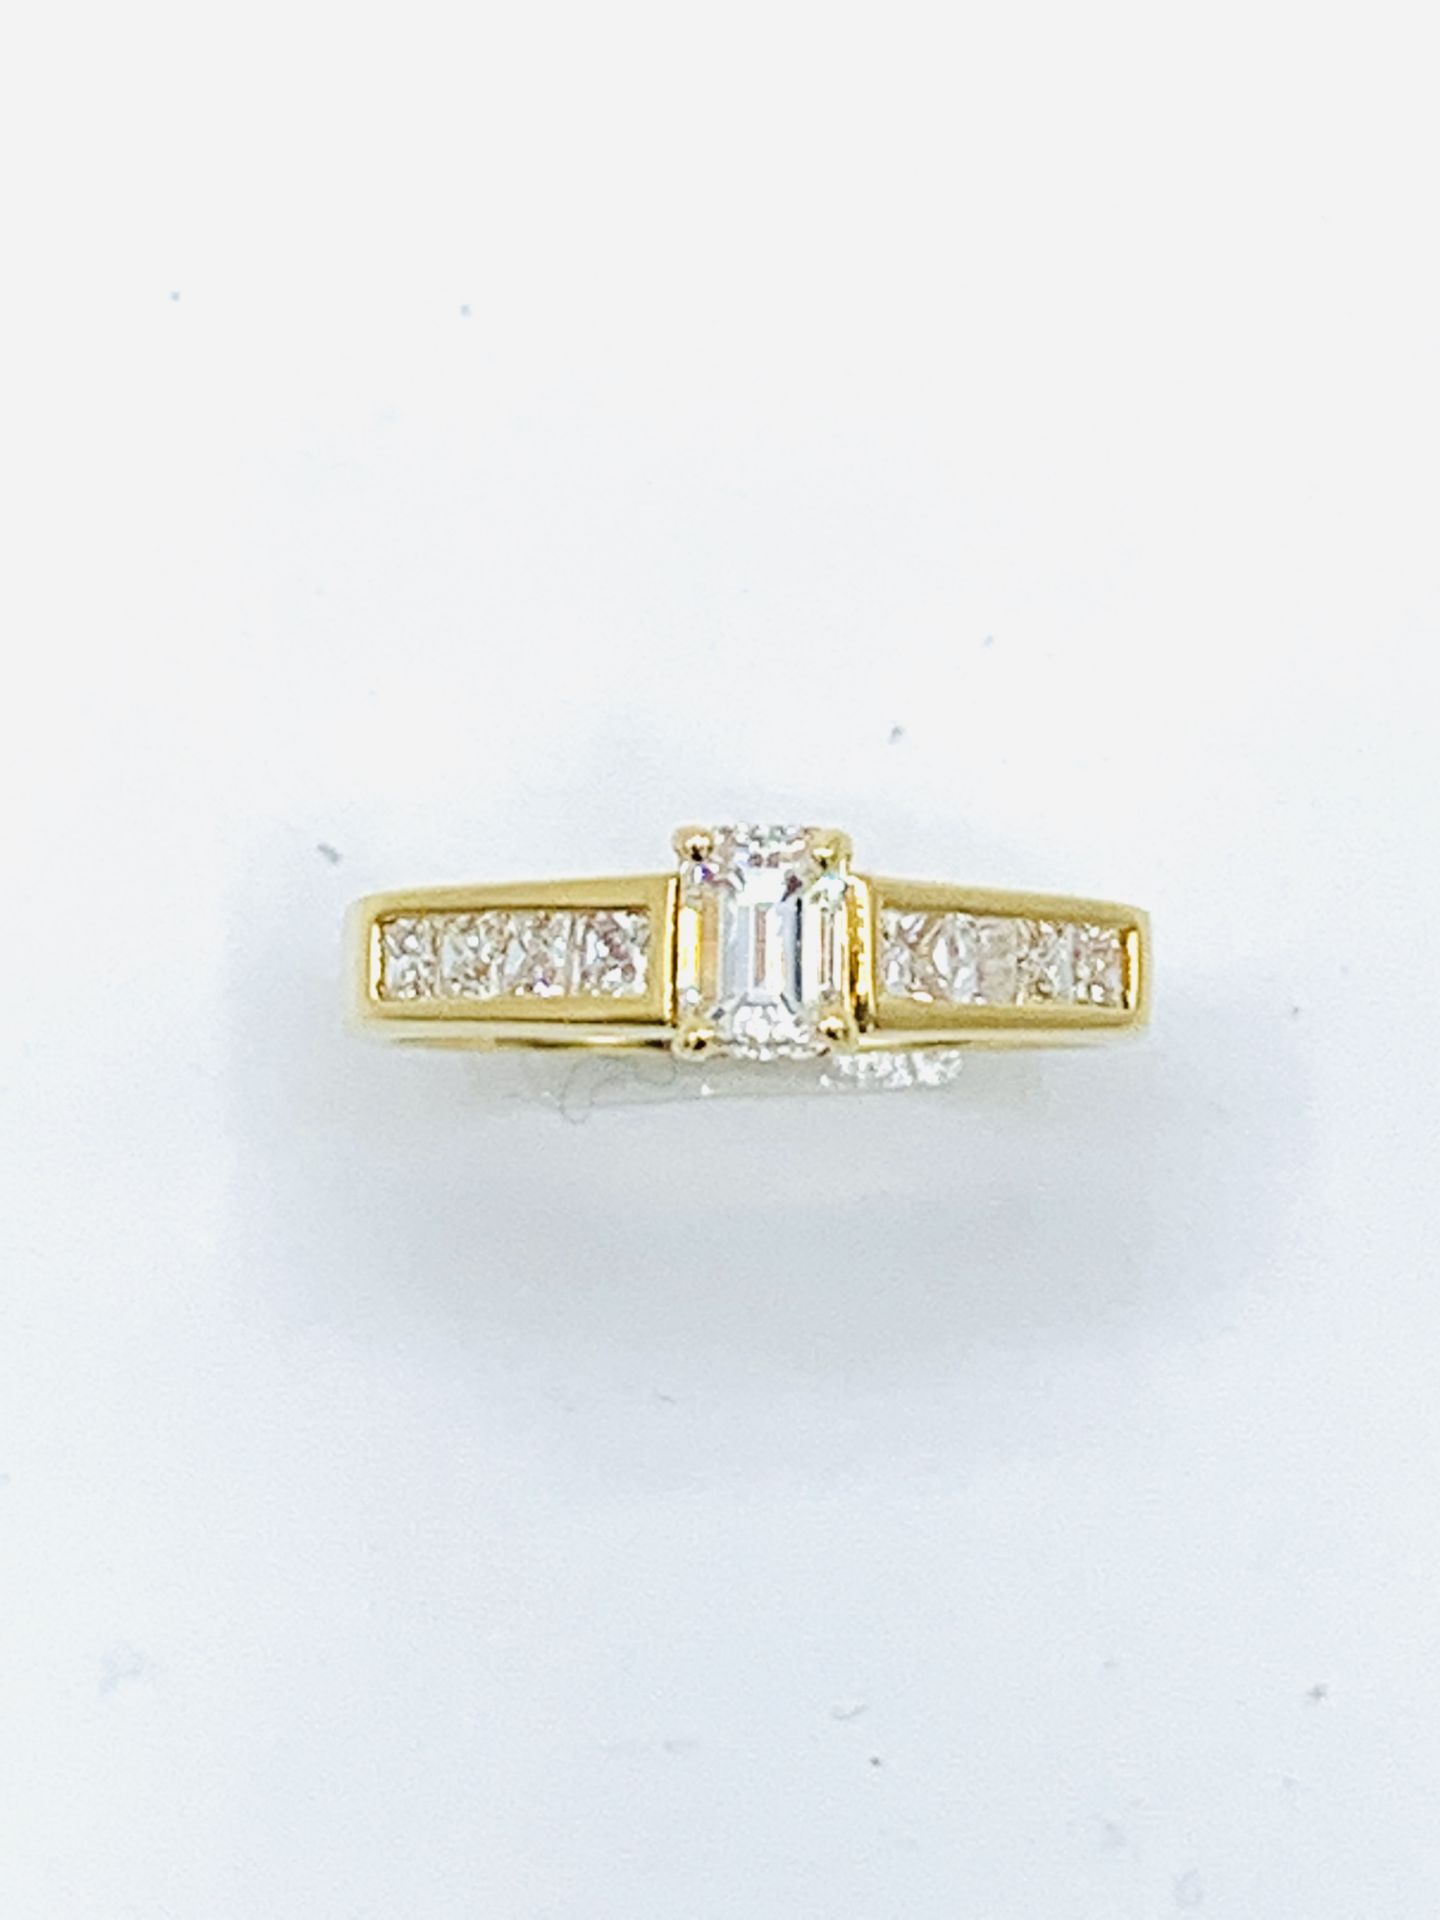 750 gold ring with baguette cut centre diamond and diamonds to shoulders - Image 4 of 5